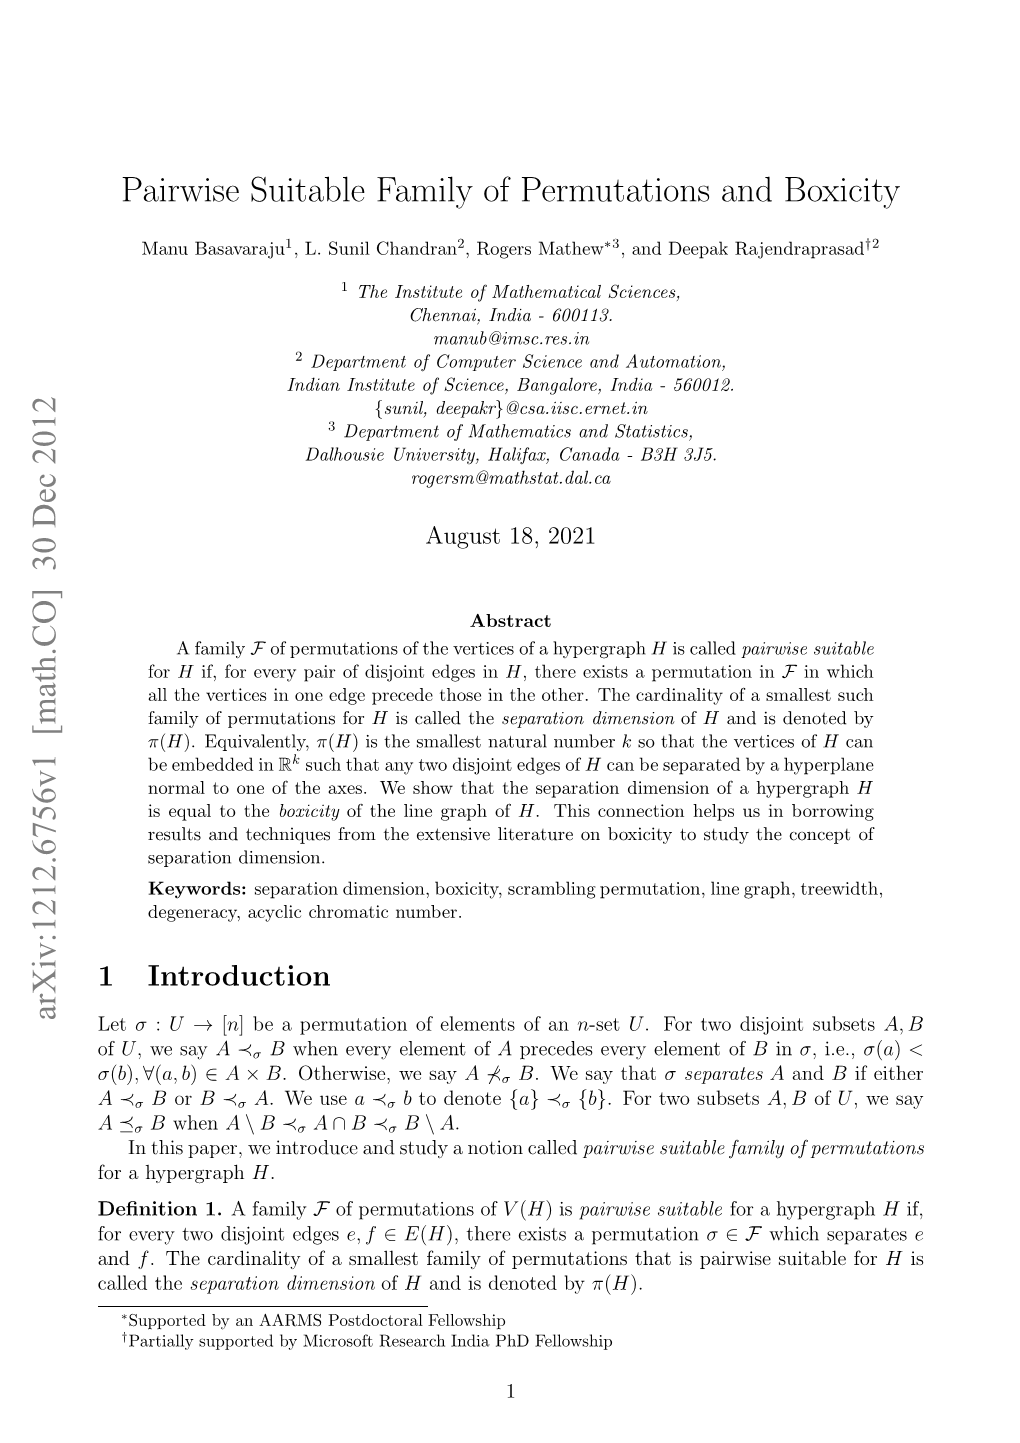 Arxiv:1212.6756V1 [Math.CO] 30 Dec 2012 Σ of O Hypergraph a for a O Vr W Ijitedges Disjoint Two Every for a Let Introduction 1 Ento 1